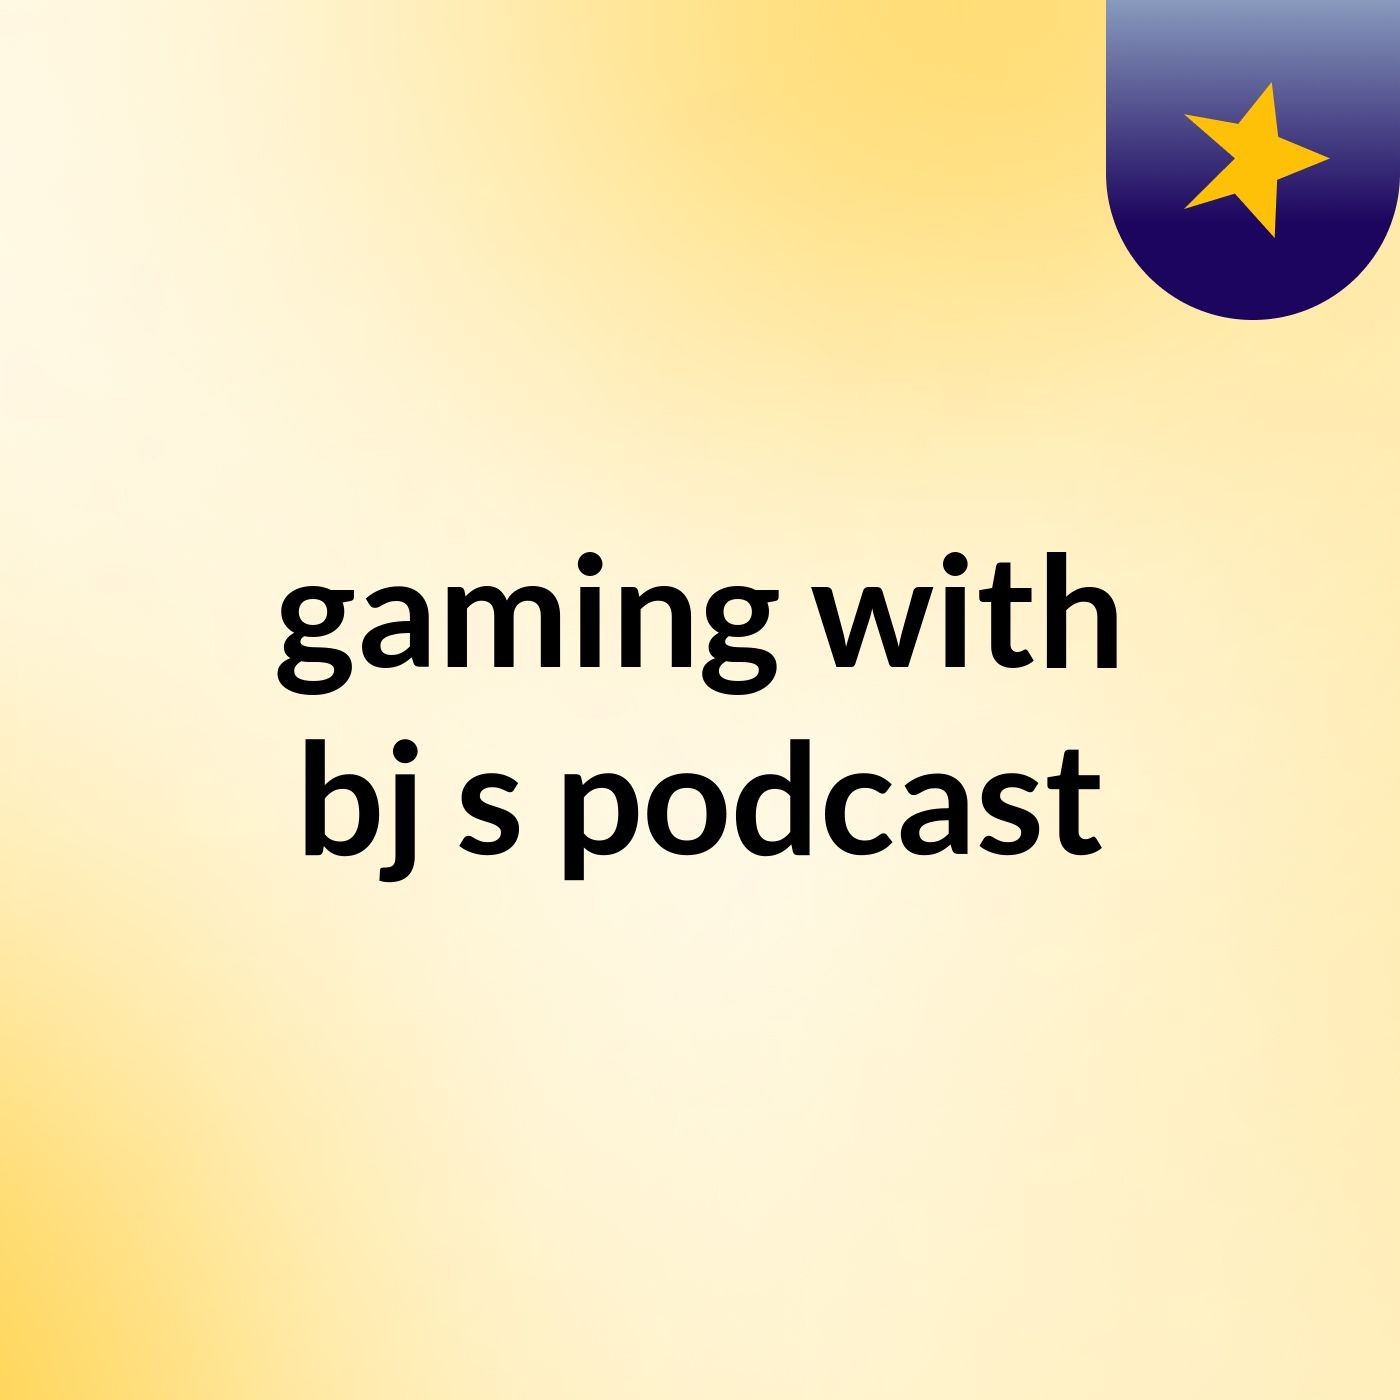 gaming with bj's podcast